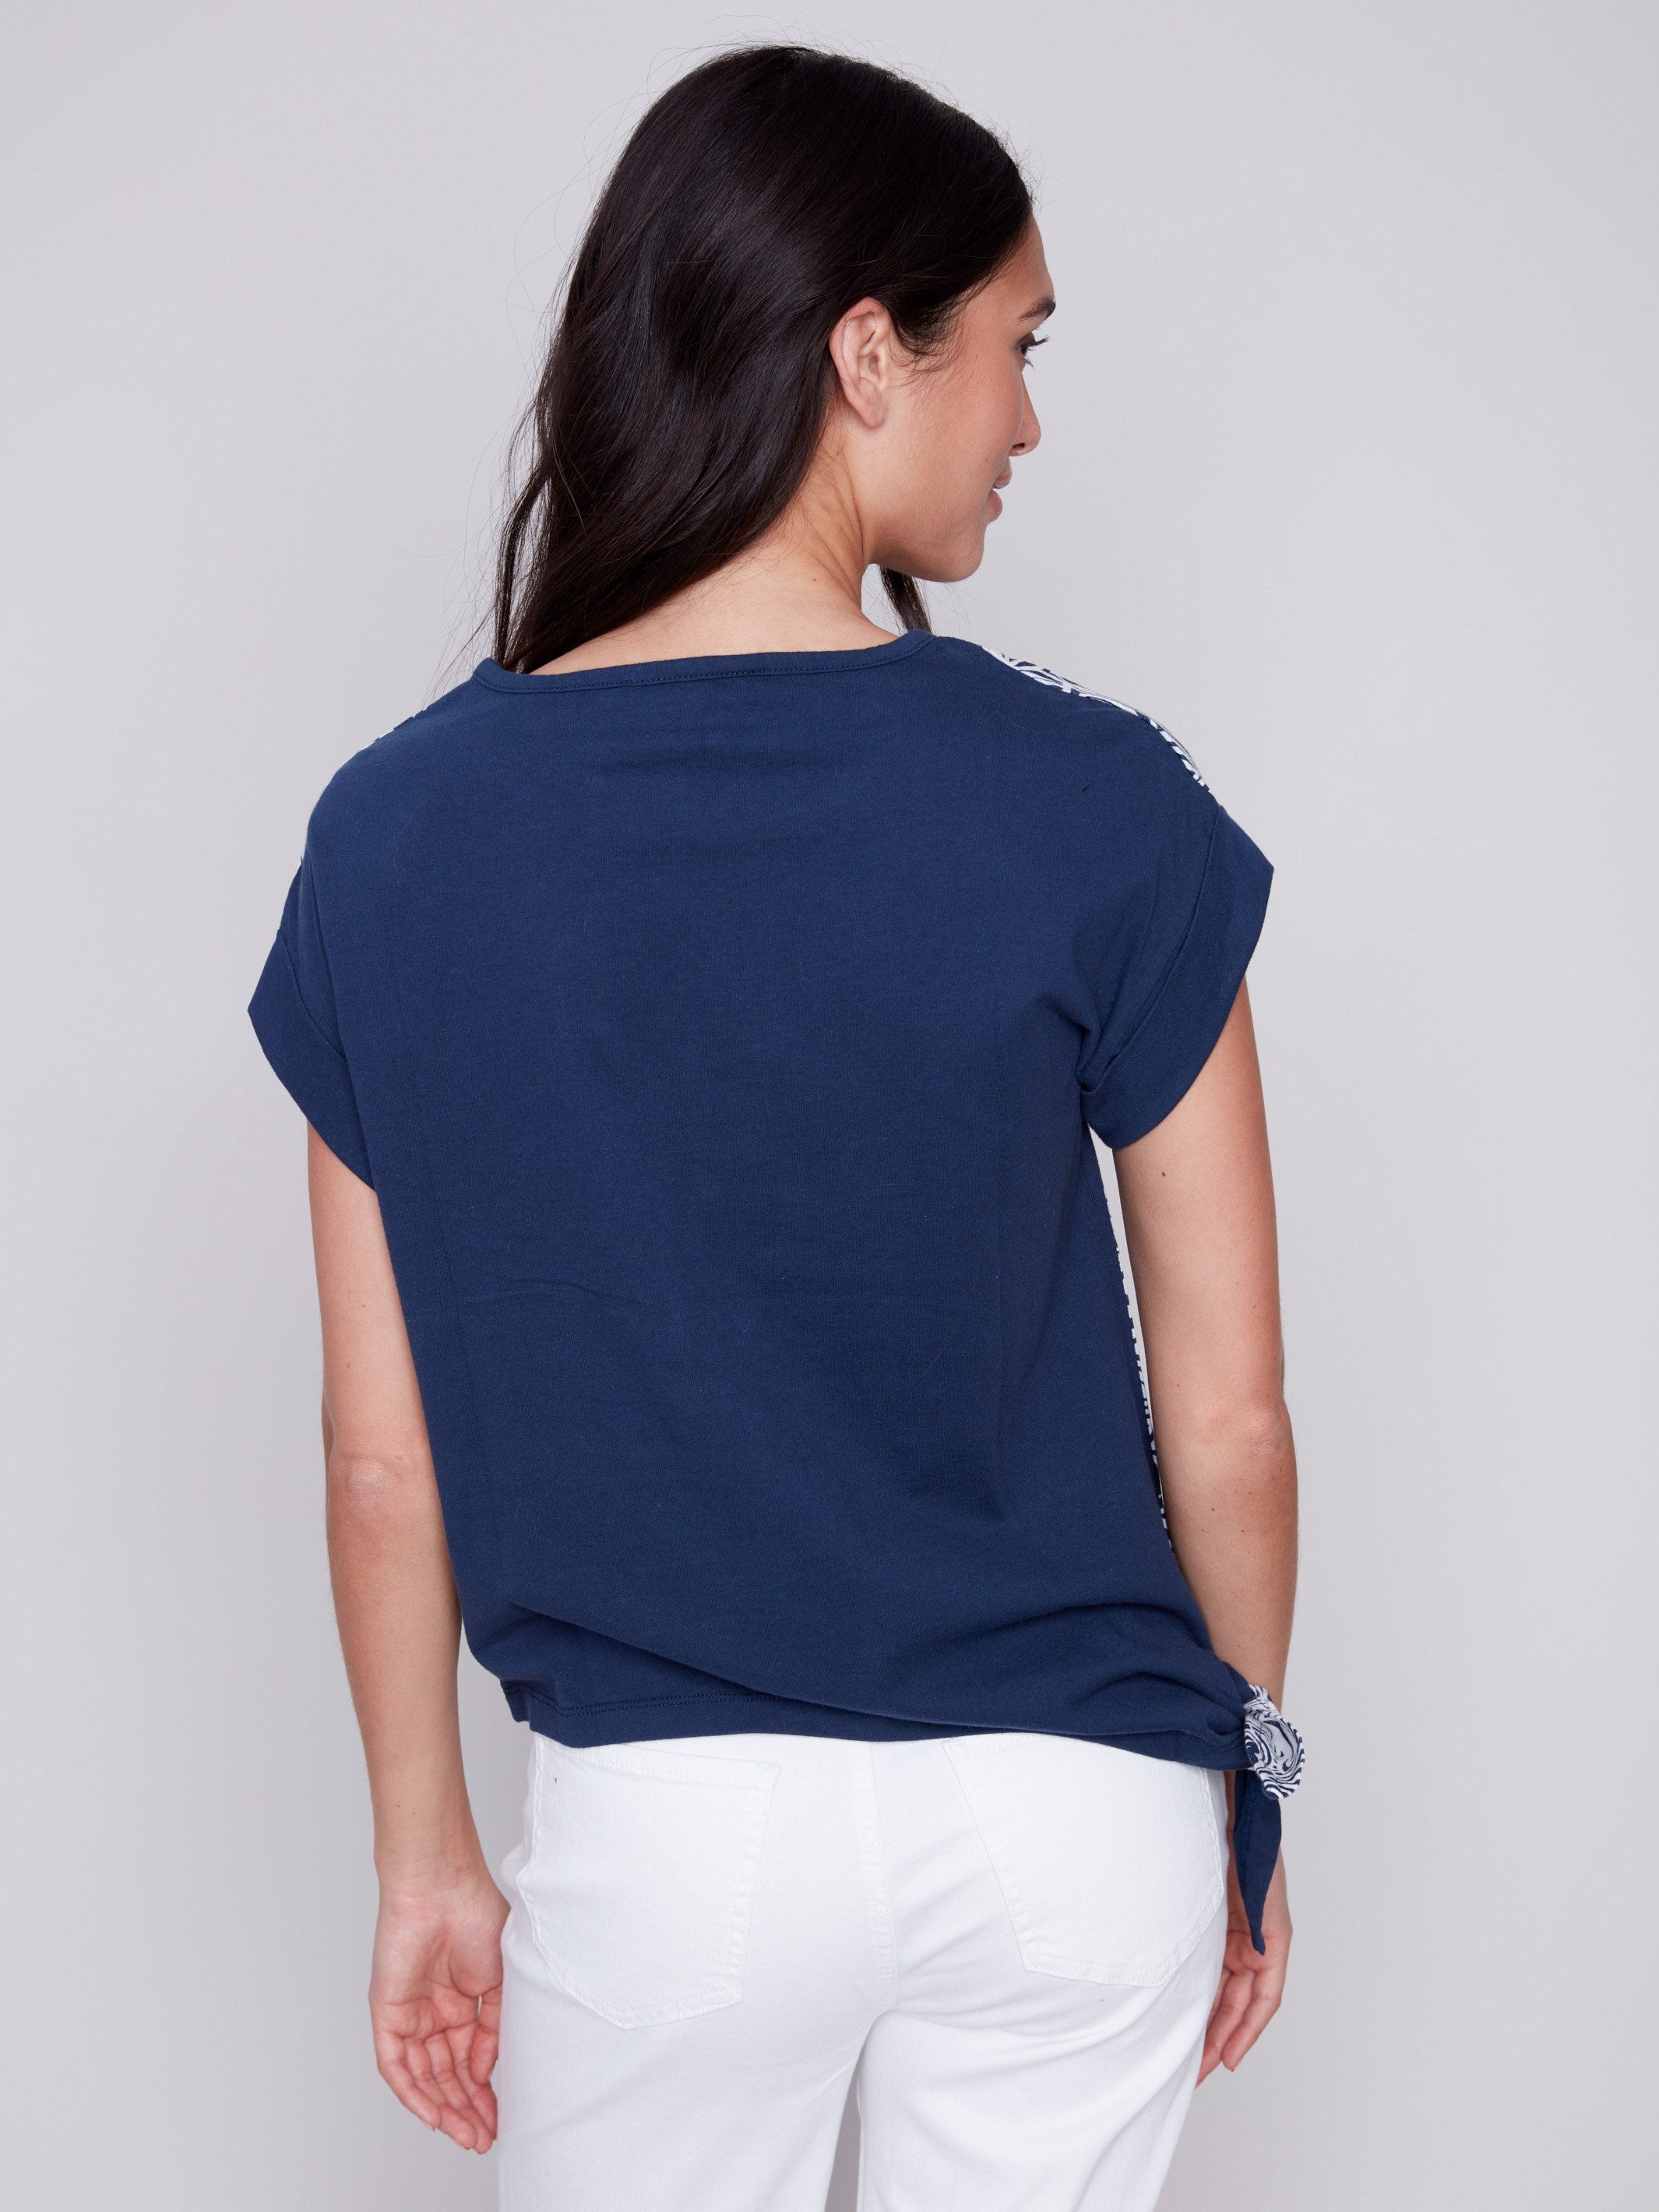 Charlie B Printed Linen Top with Side Tie - Navy - Image 5